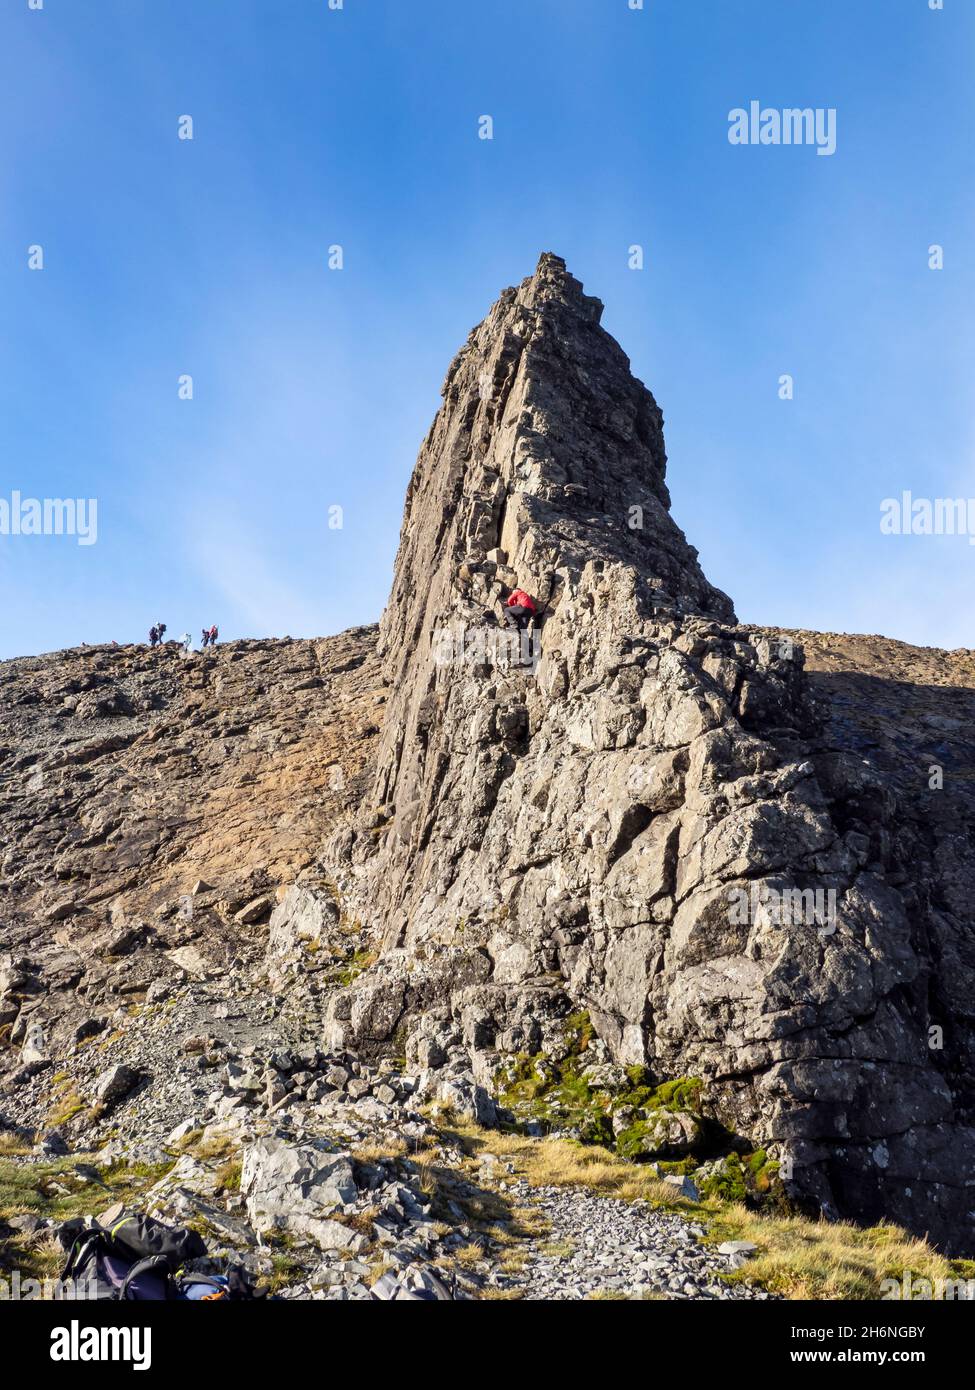 A climber soloing the Inaccessible Pinnacle on Sgurr Dearg on the Cuillin Ridge on the Isle of Skye, Scotland, UK. The In Pin is the hardest of all Sc Stock Photo